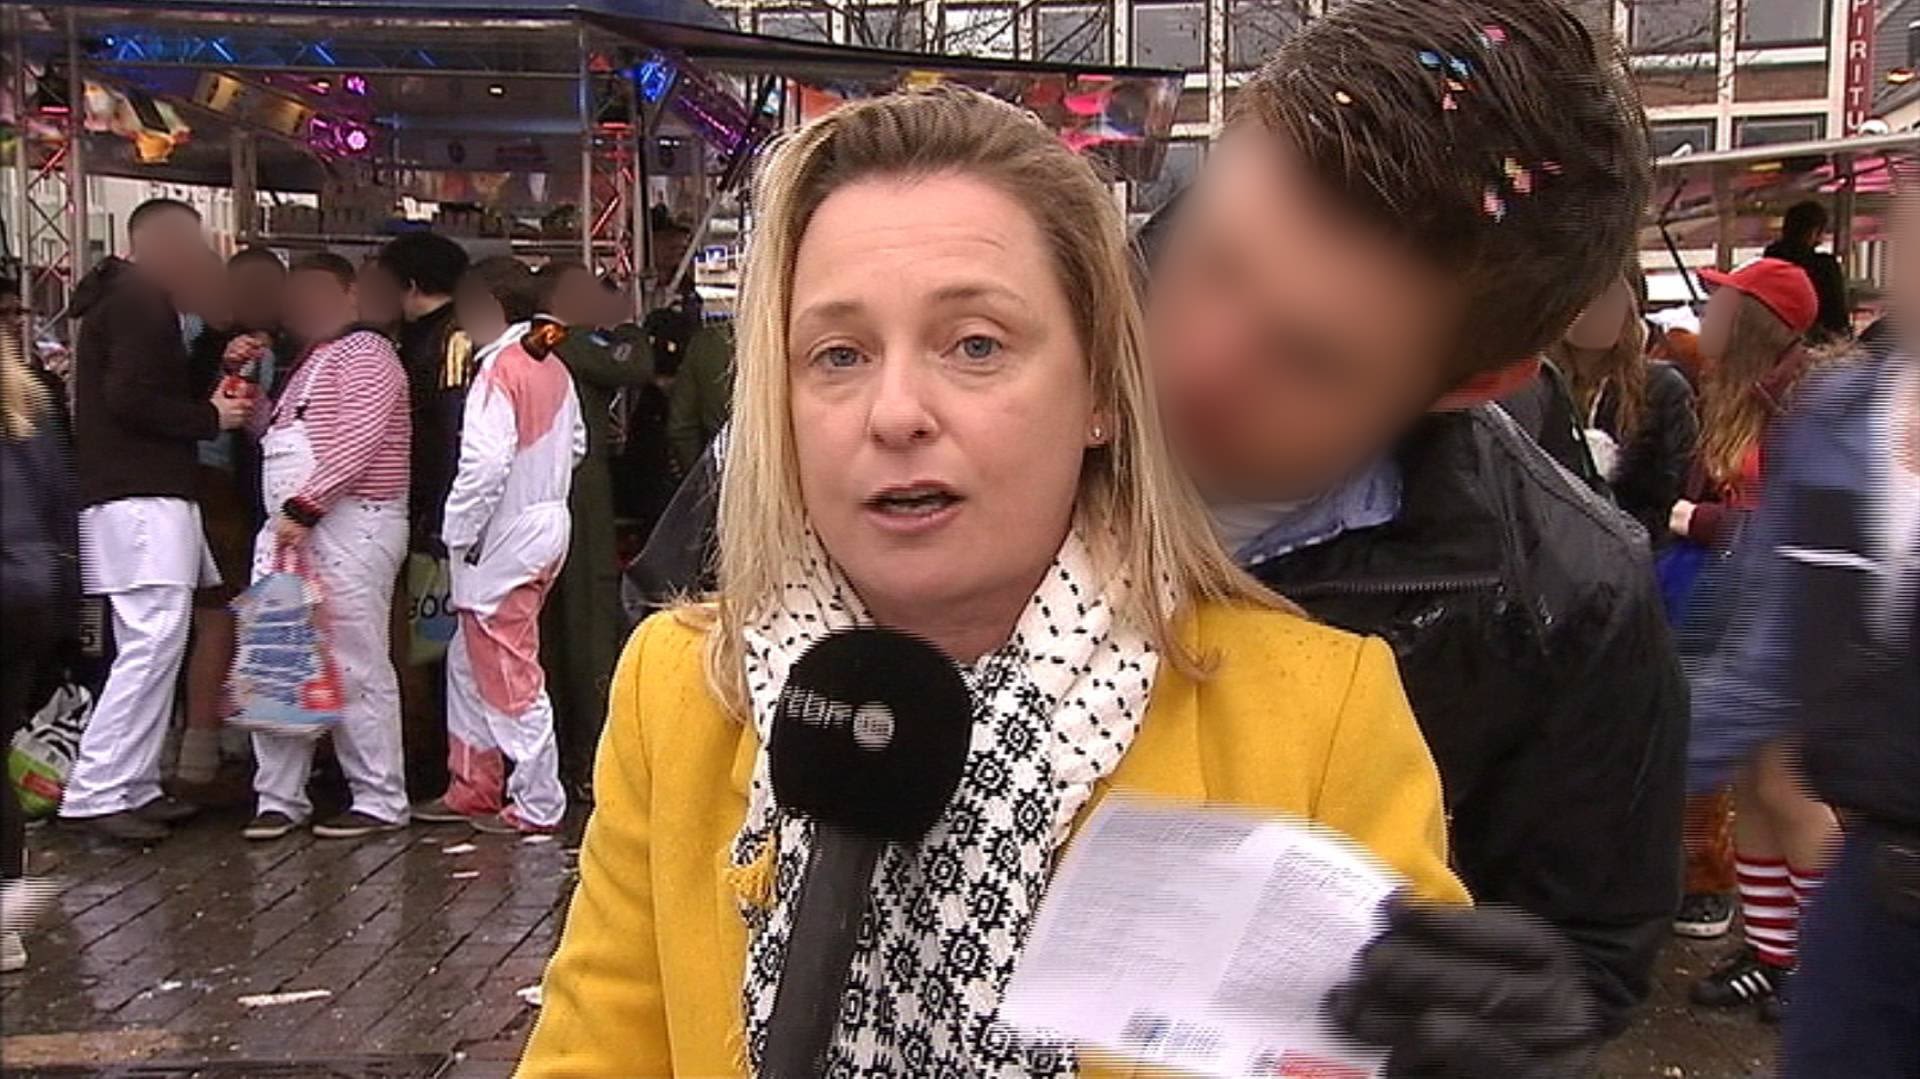 Grop Rap Sex - In Cologne, reporter groped while covering Carnival on live television | CNN